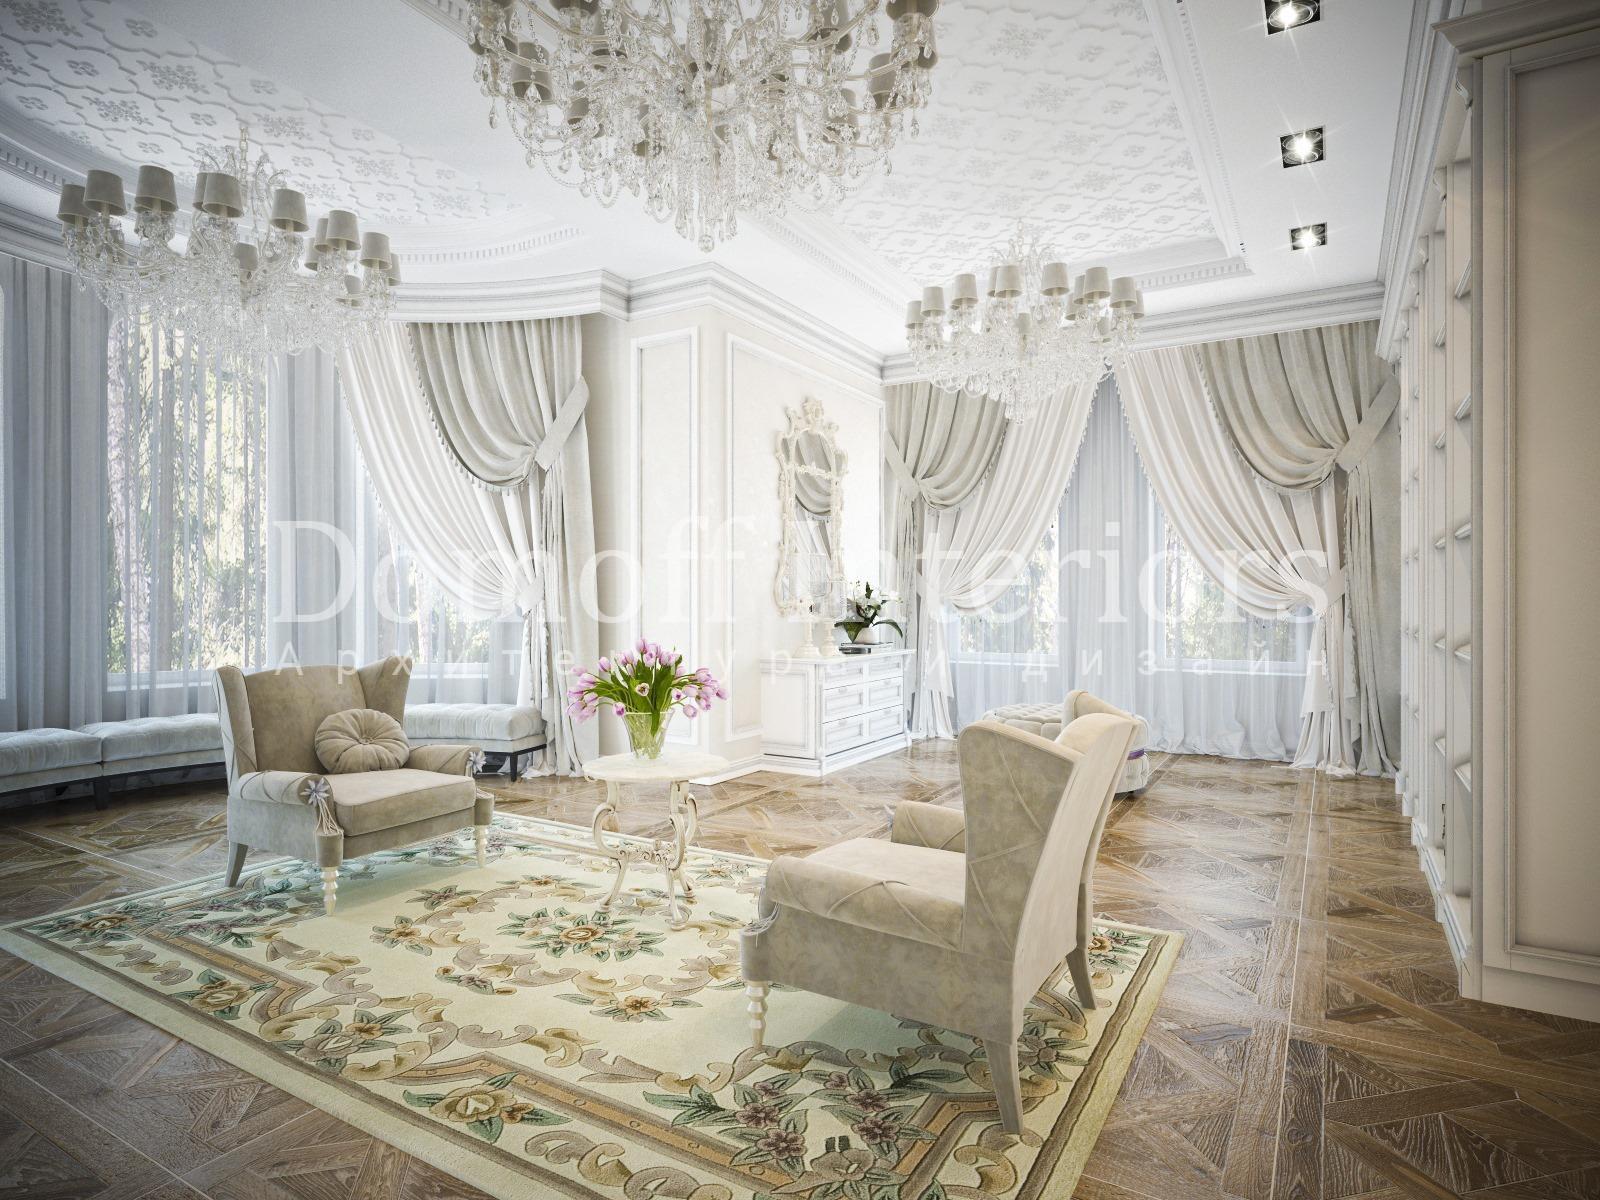 Master bedroom's dressing room made in the style of Classics Eclecticism